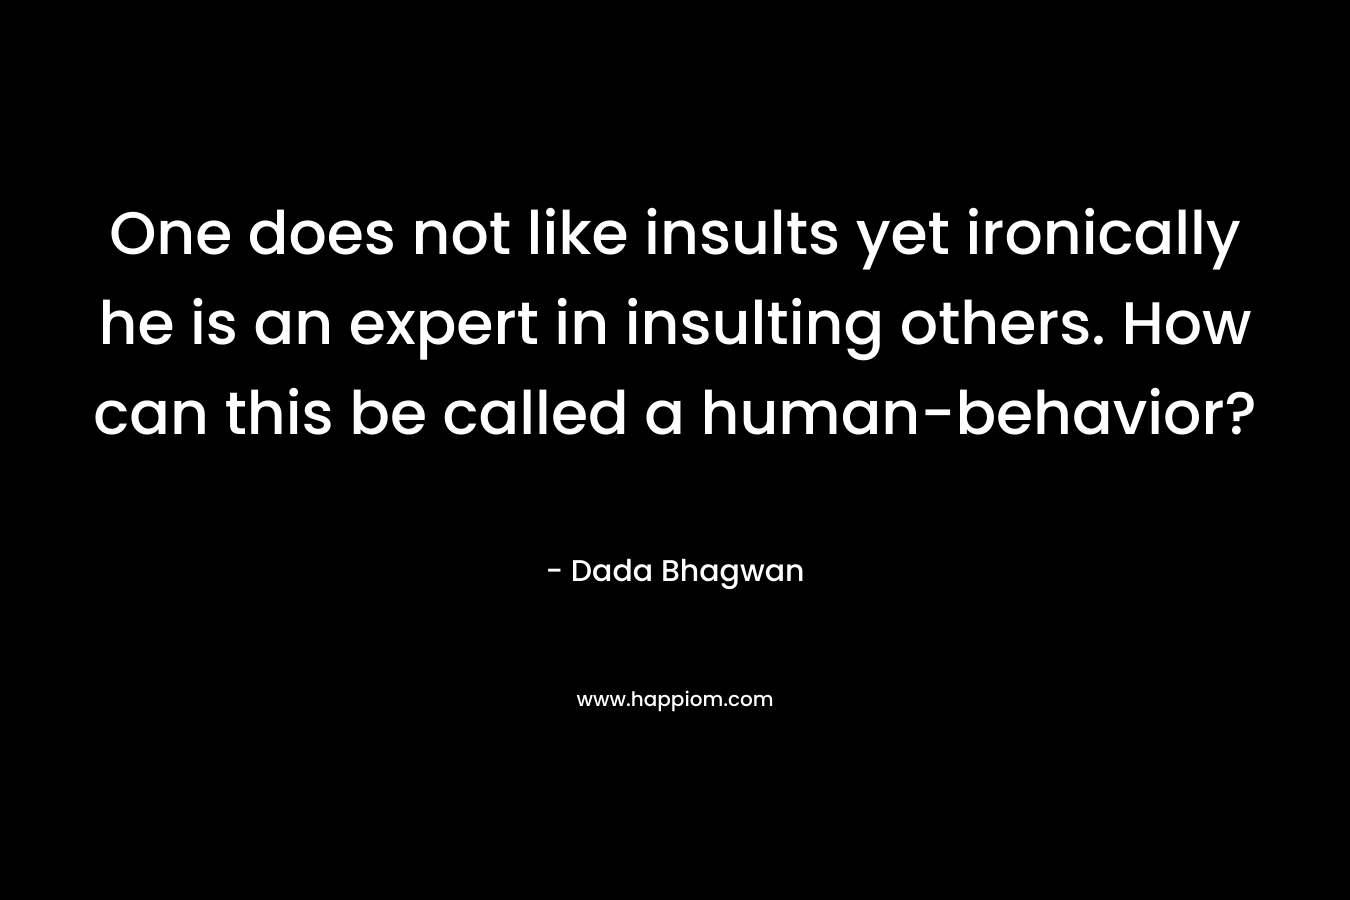 One does not like insults yet ironically he is an expert in insulting others. How can this be called a human-behavior?